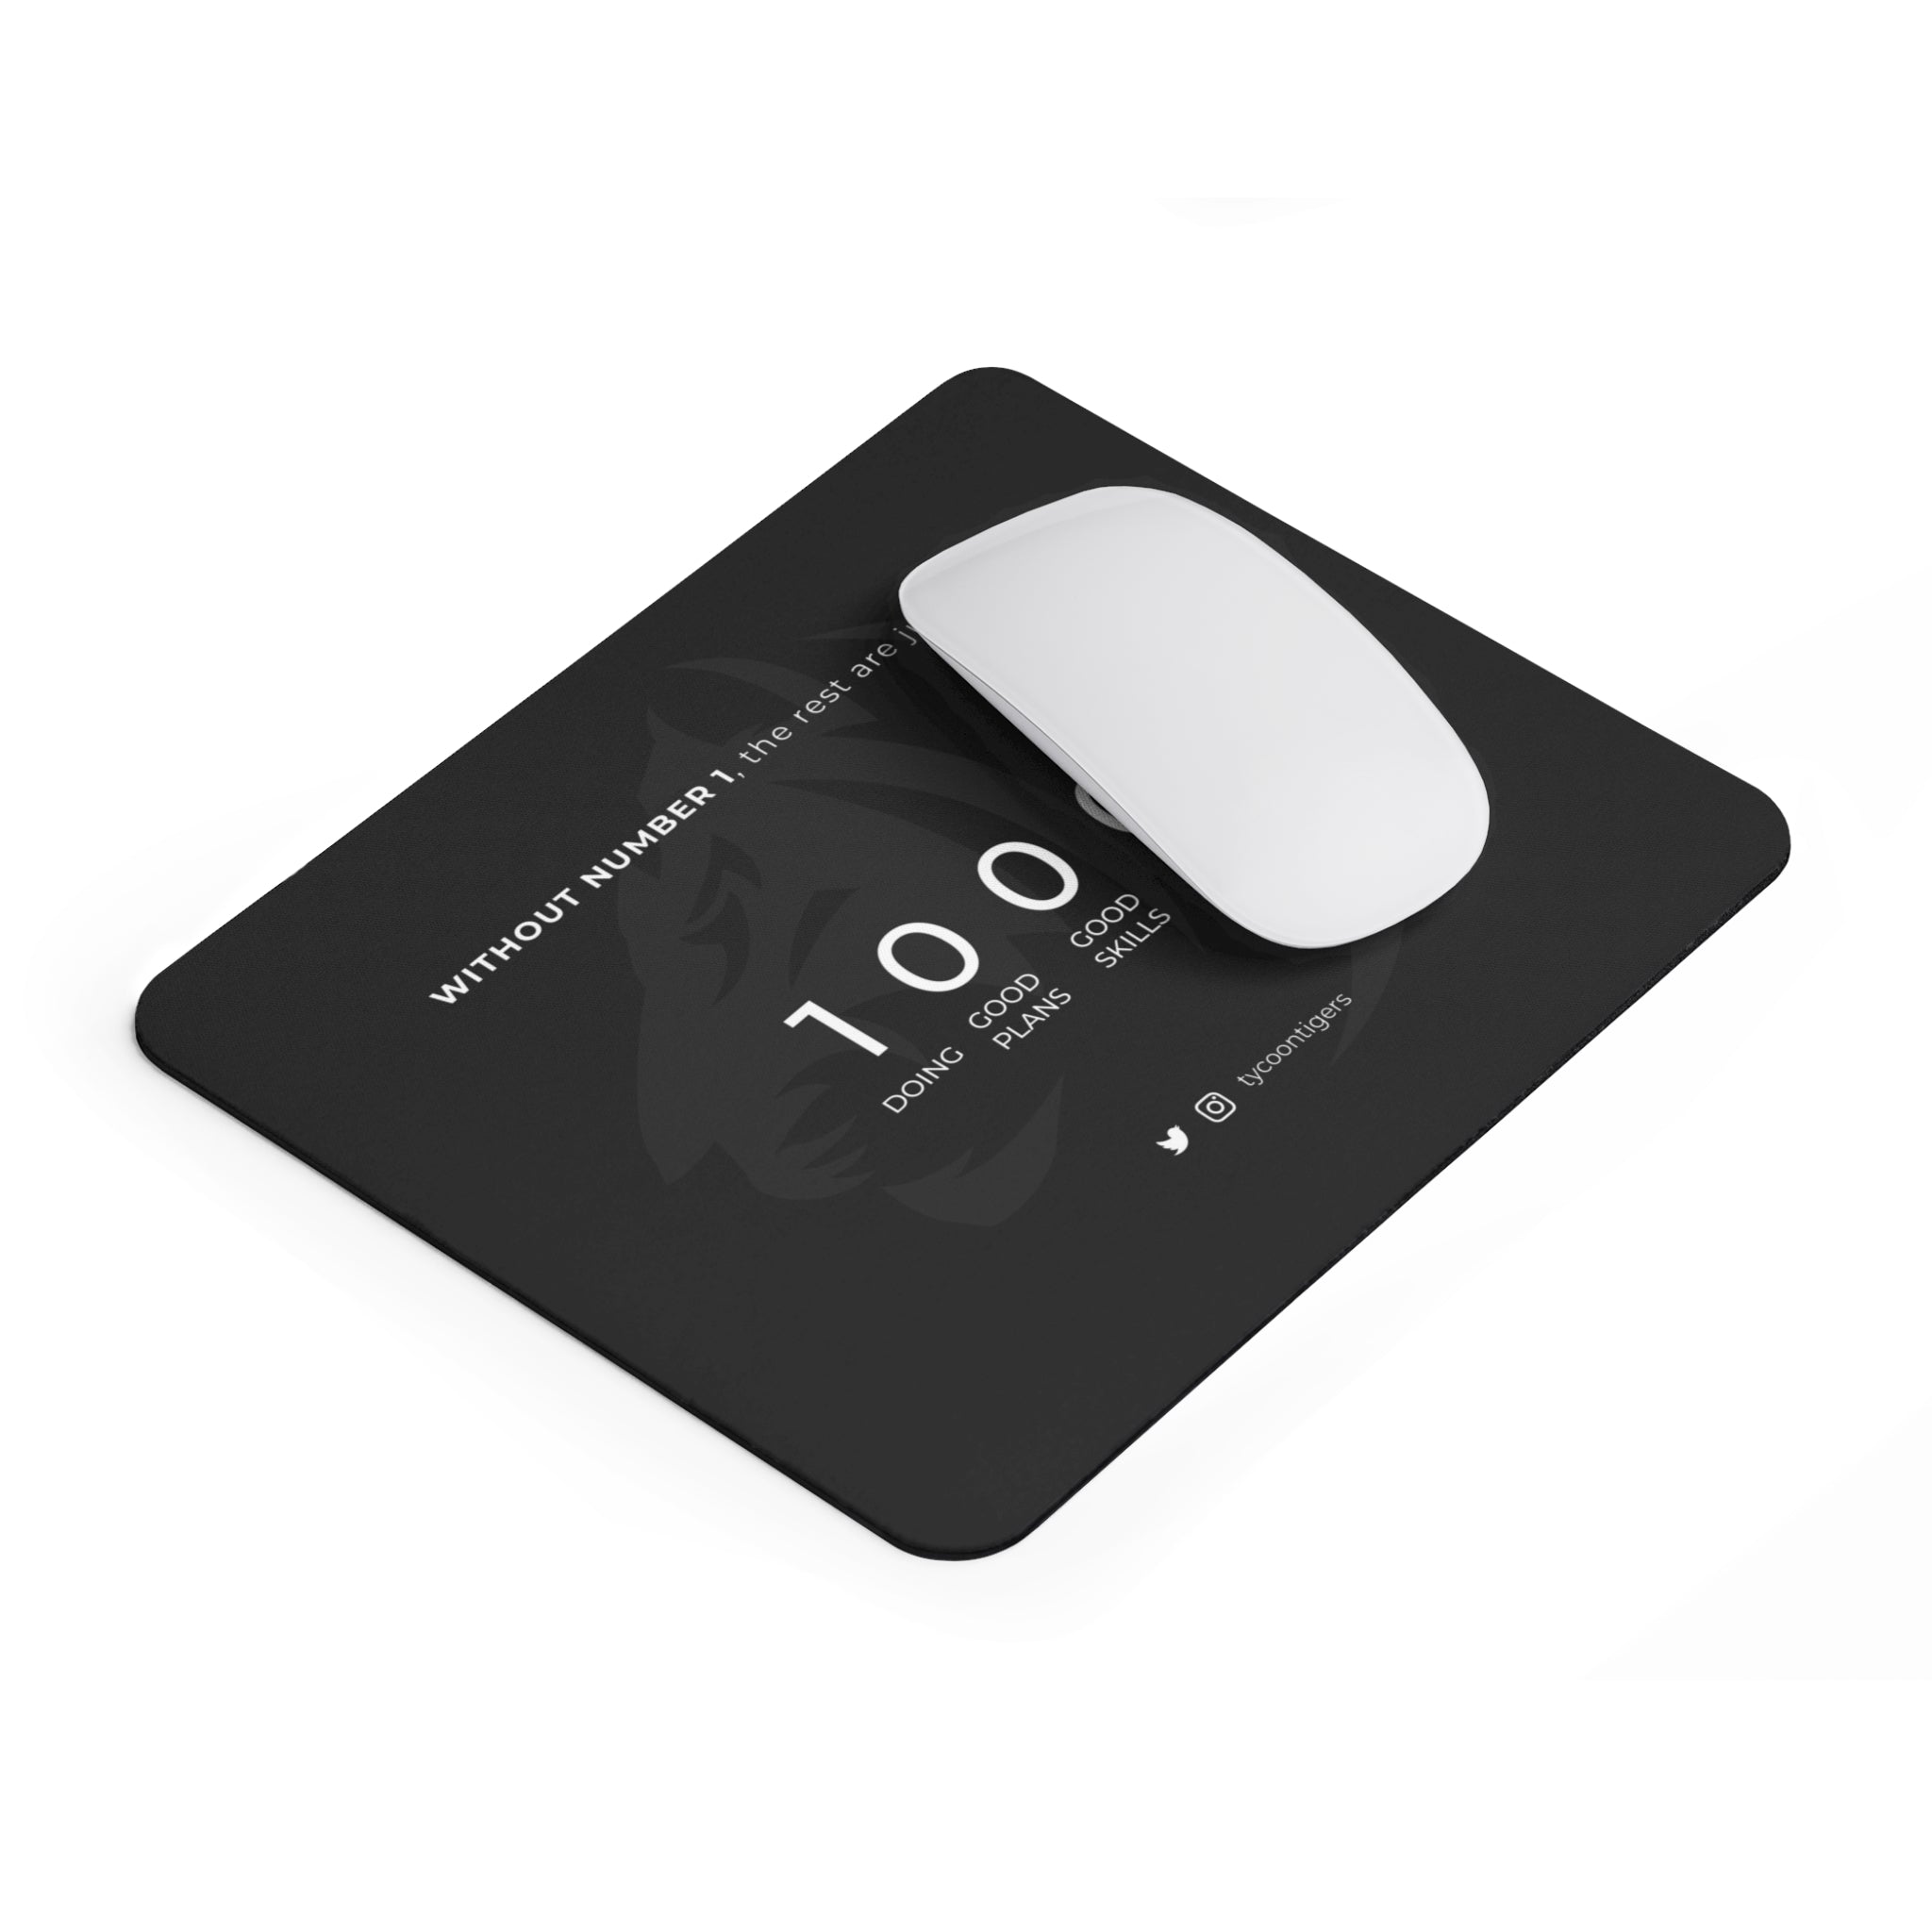 1000 - Mouse Pad